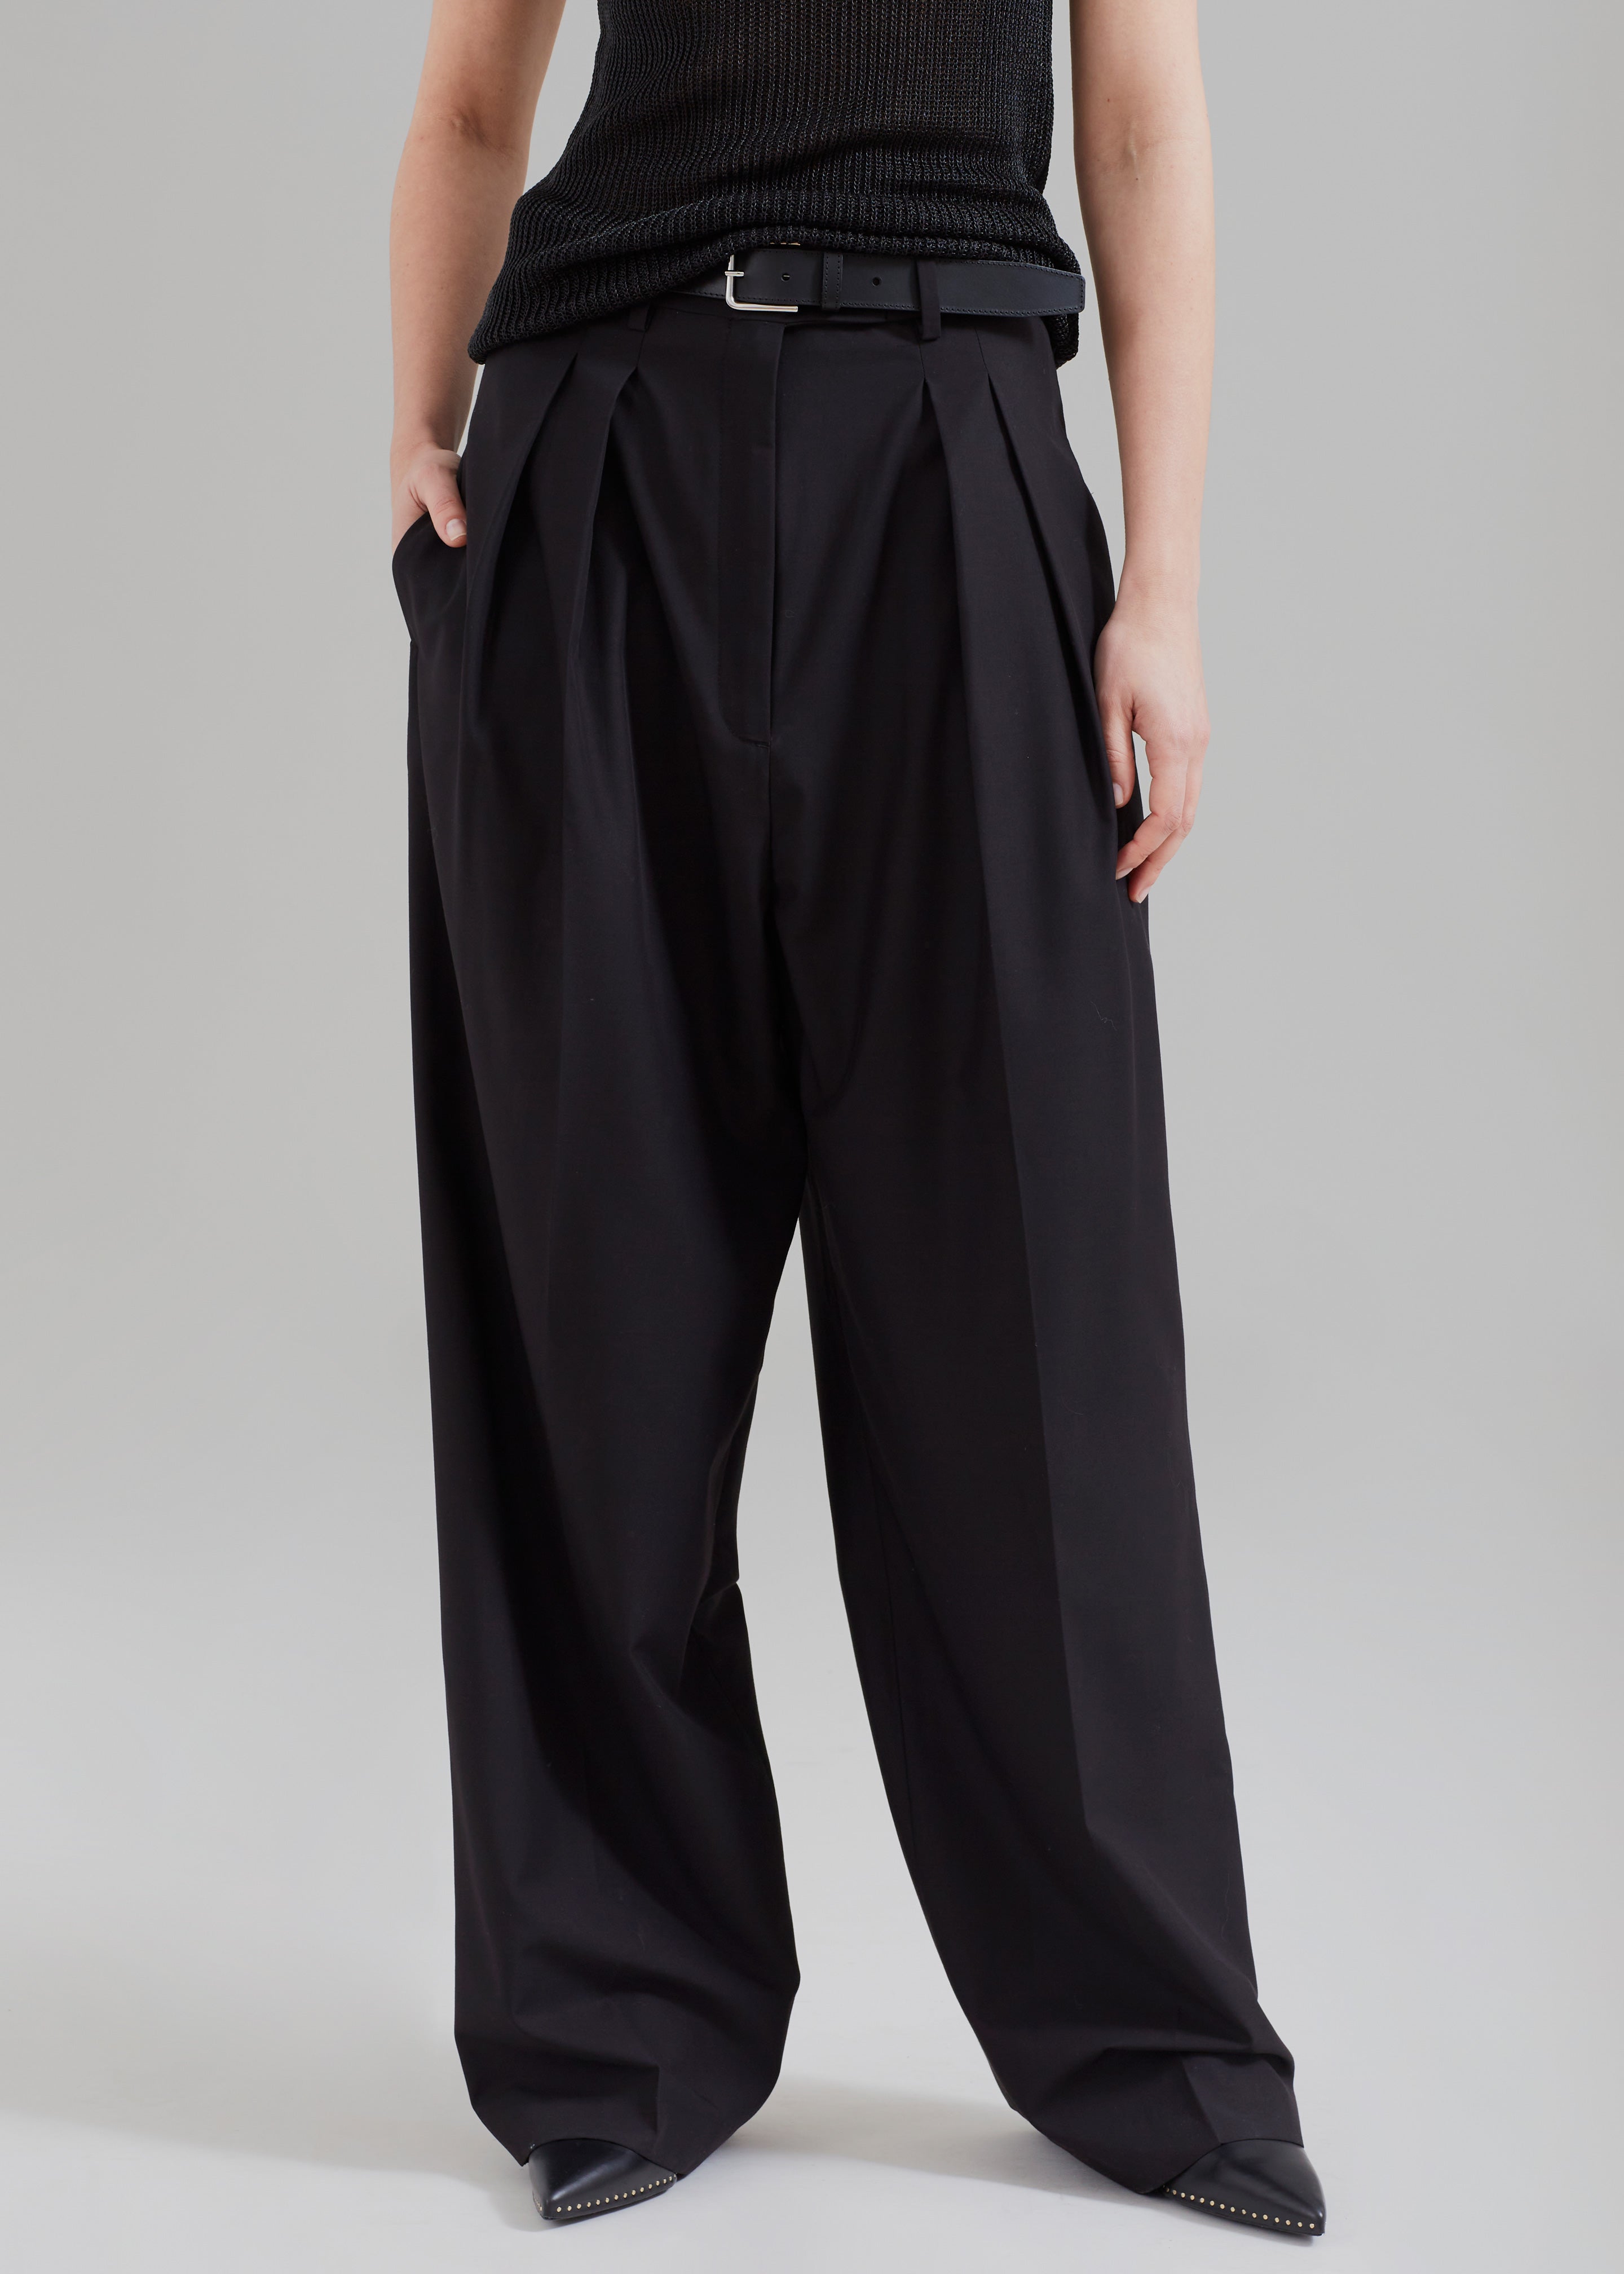 Sion Pintuck Trousers - Black - 8